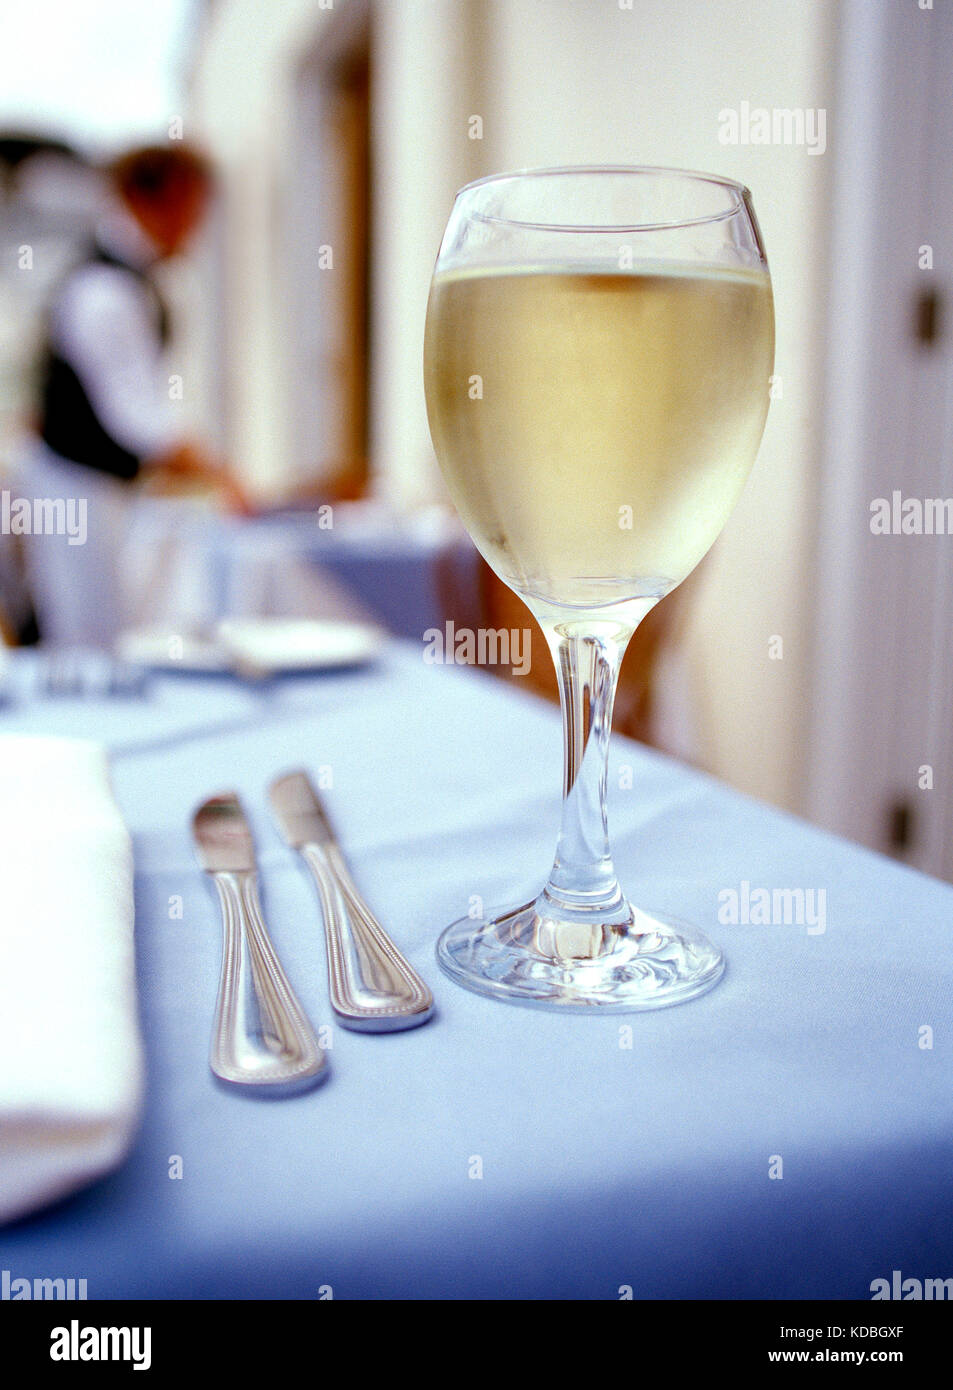 Strill life. Food.  Restaurant interior table setting with glass of white wine. Stock Photo